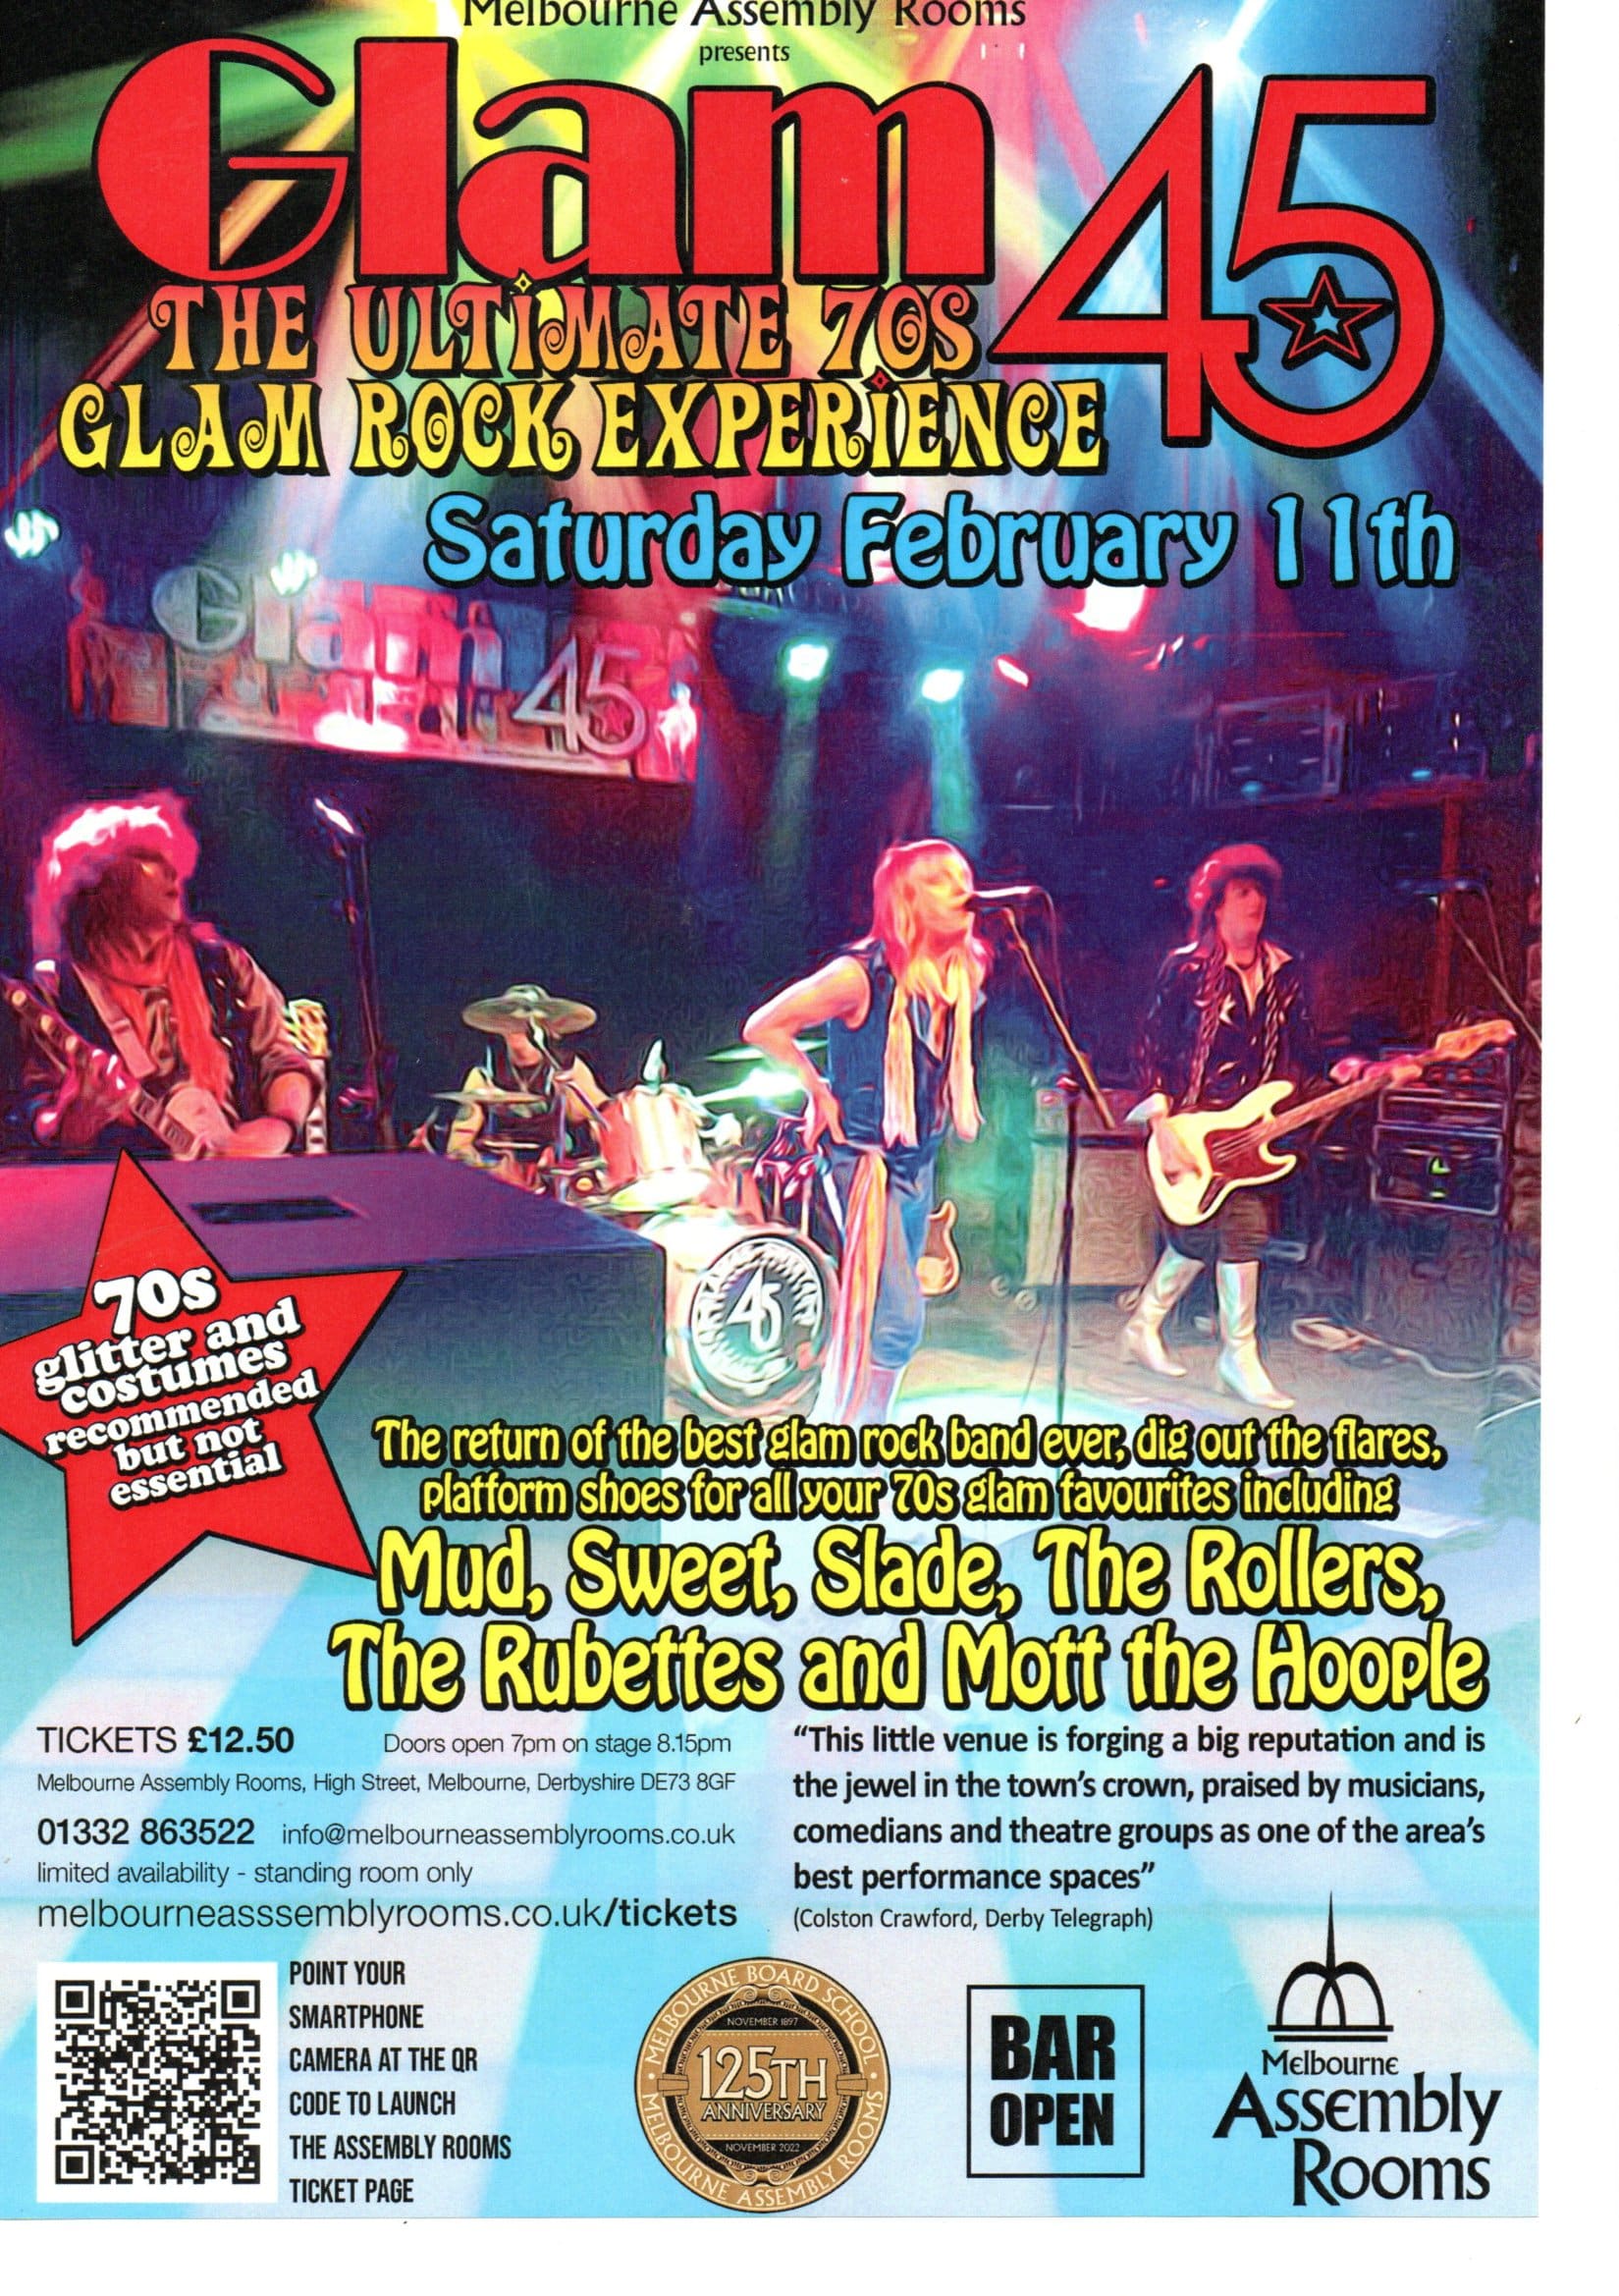 Glam 45 - The Ultimate 70s Glam Rock Experience - Melbourne Assembly Rooms